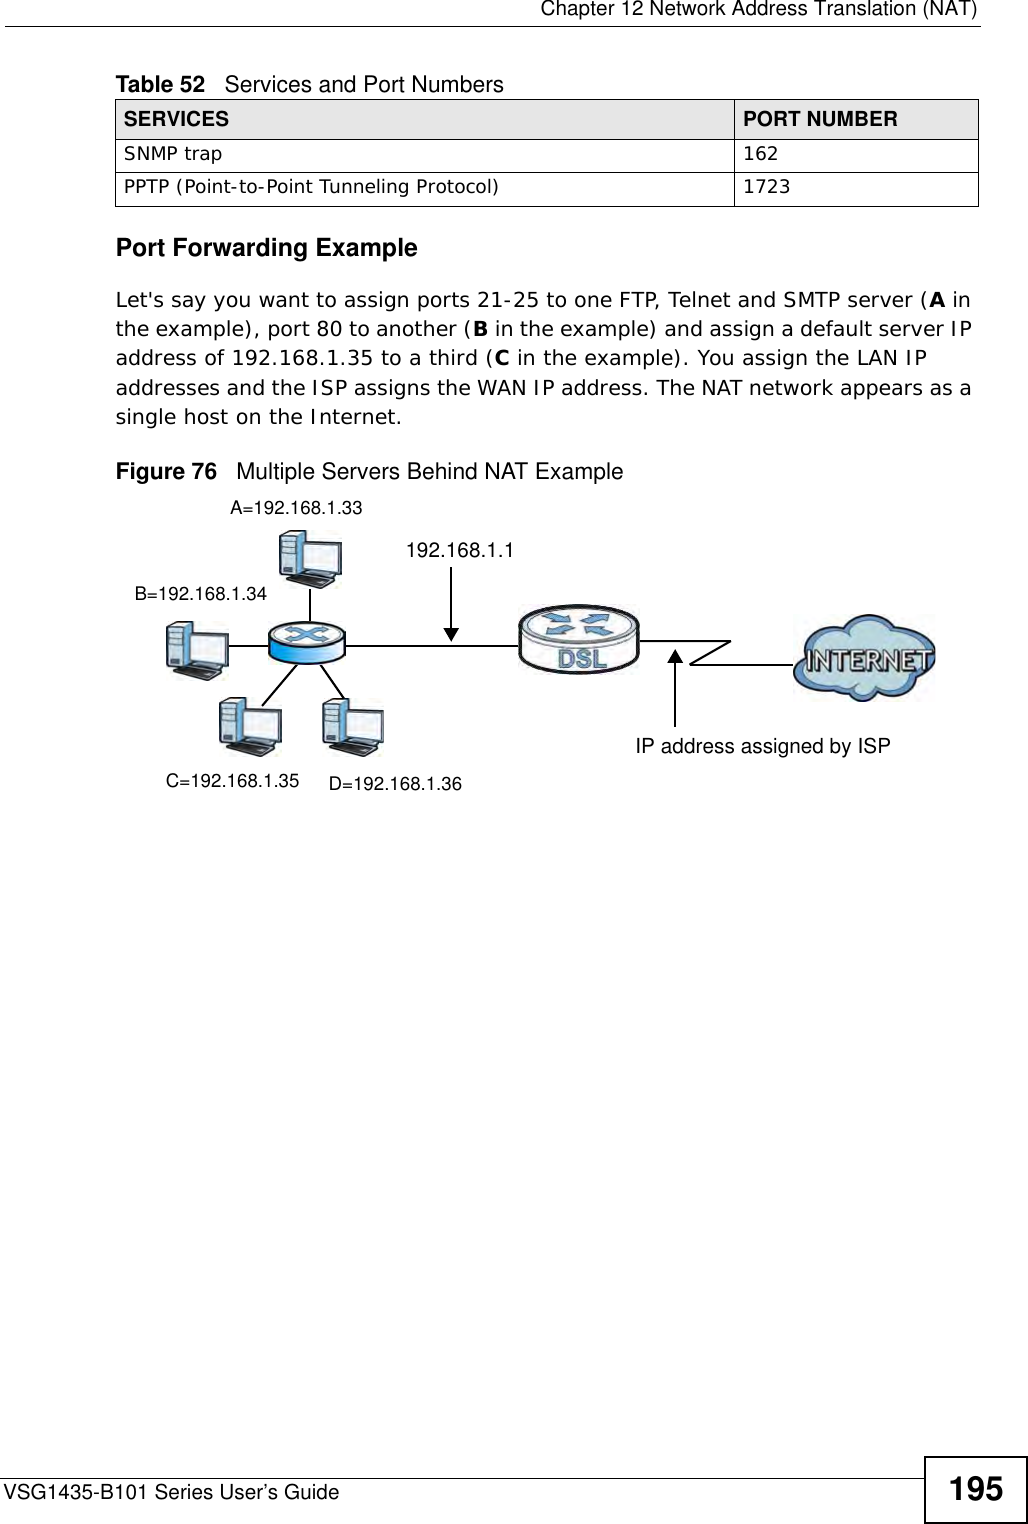  Chapter 12 Network Address Translation (NAT)VSG1435-B101 Series User’s Guide 195Port Forwarding ExampleLet&apos;s say you want to assign ports 21-25 to one FTP, Telnet and SMTP server (A in the example), port 80 to another (B in the example) and assign a default server IP address of 192.168.1.35 to a third (C in the example). You assign the LAN IP addresses and the ISP assigns the WAN IP address. The NAT network appears as a single host on the Internet.Figure 76   Multiple Servers Behind NAT ExampleSNMP trap 162PPTP (Point-to-Point Tunneling Protocol) 1723Table 52   Services and Port NumbersSERVICES PORT NUMBERD=192.168.1.36192.168.1.1IP address assigned by ISPA=192.168.1.33B=192.168.1.34C=192.168.1.35